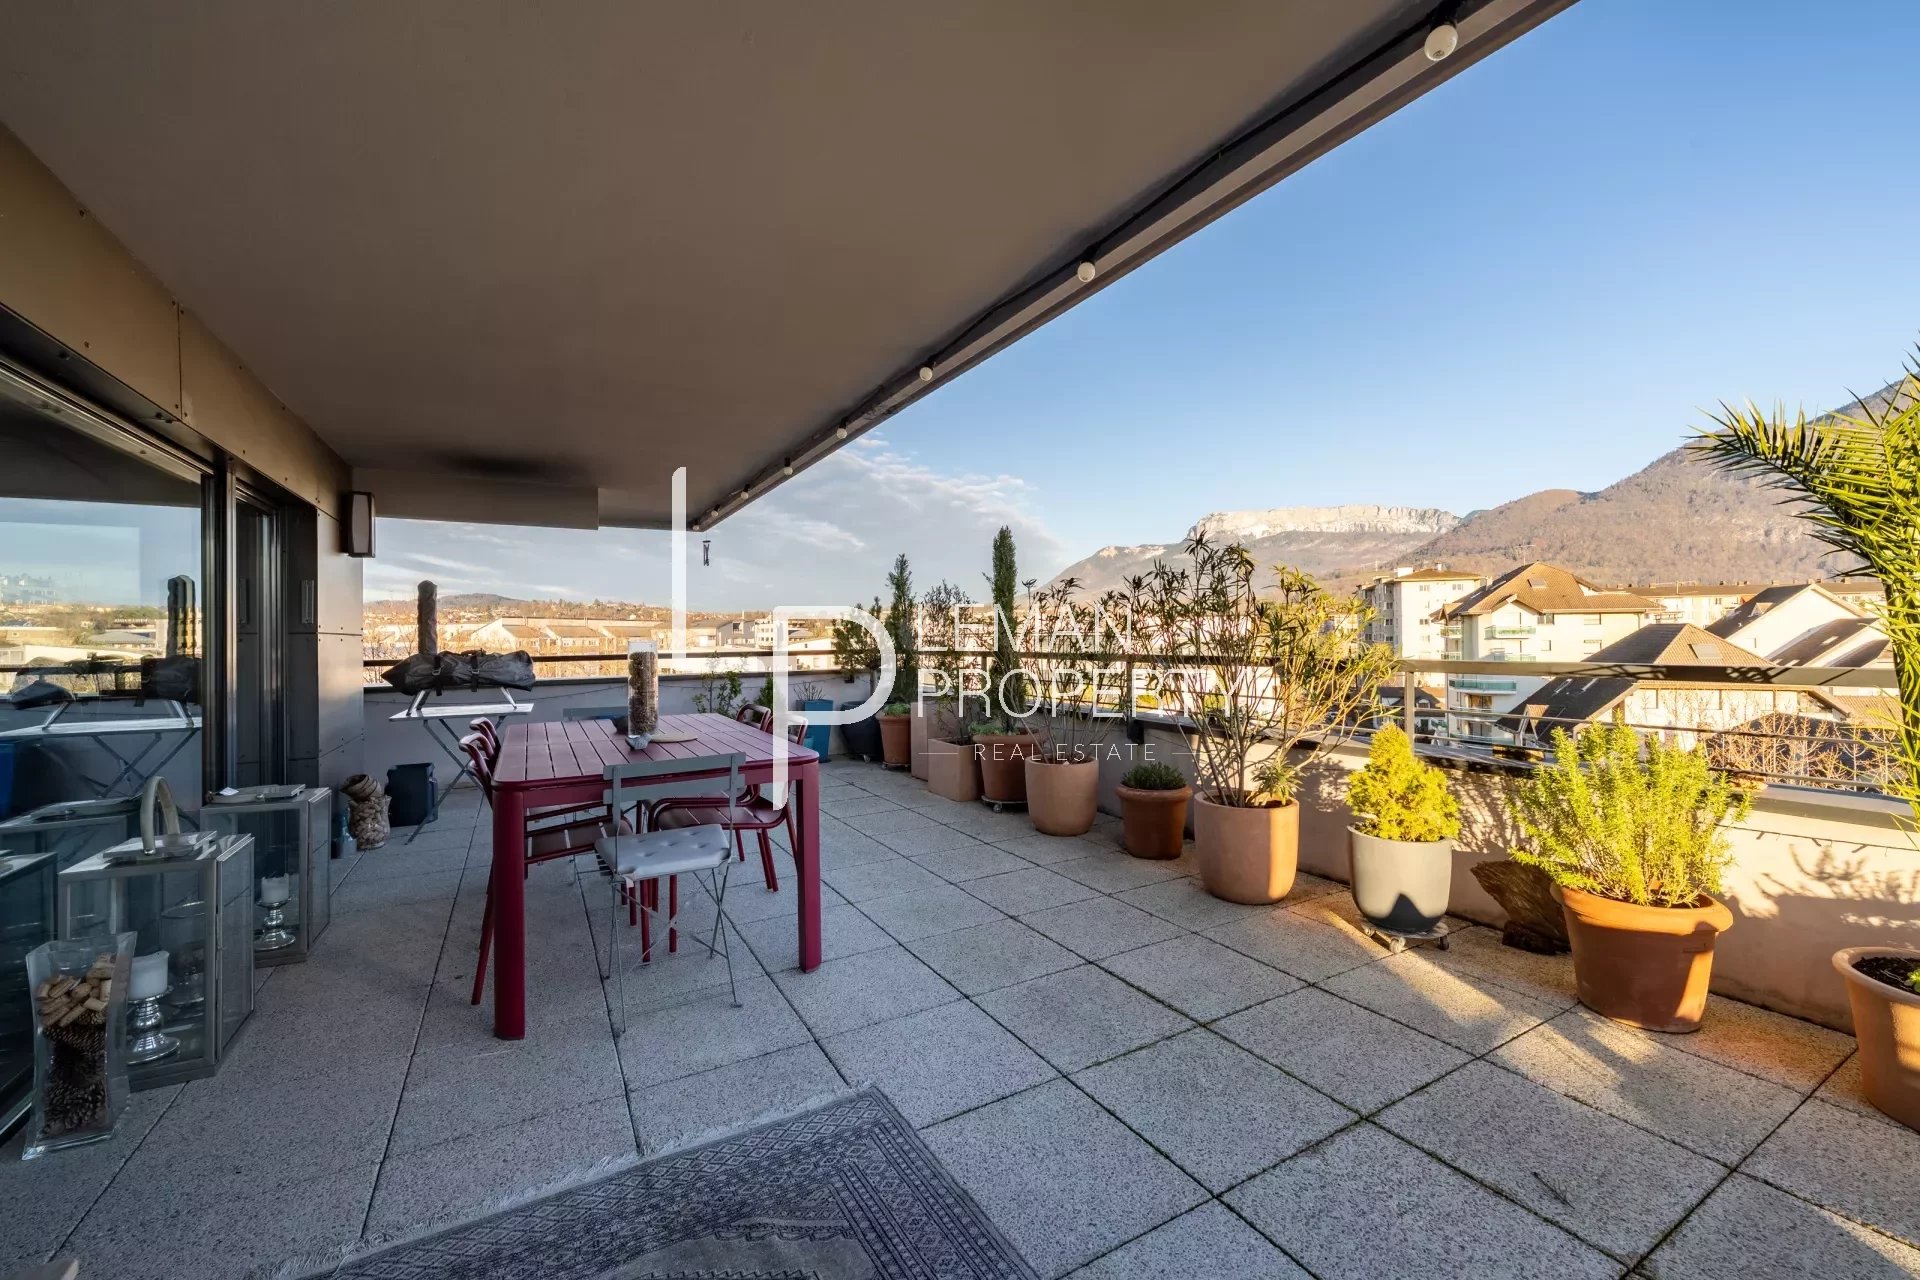 ANNECY - TRIANGLE D'OR - Magnifique appartement